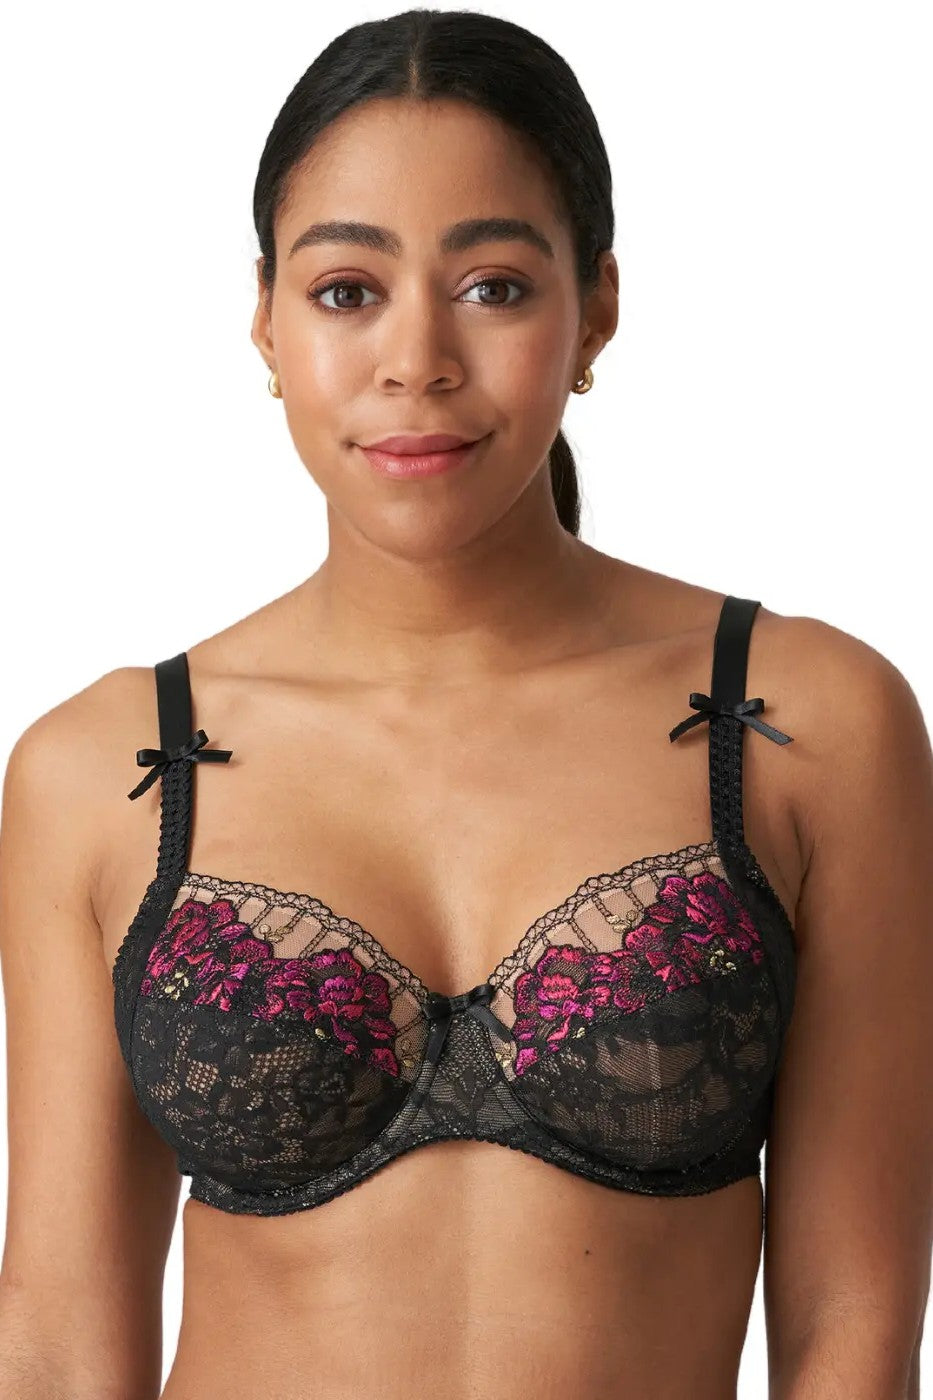 NuBra Basics SEAMLESS UNDERWIRE BLACK buy for the best price CAD$ 65.00 -  Canada and U.S. delivery – Bralissimo